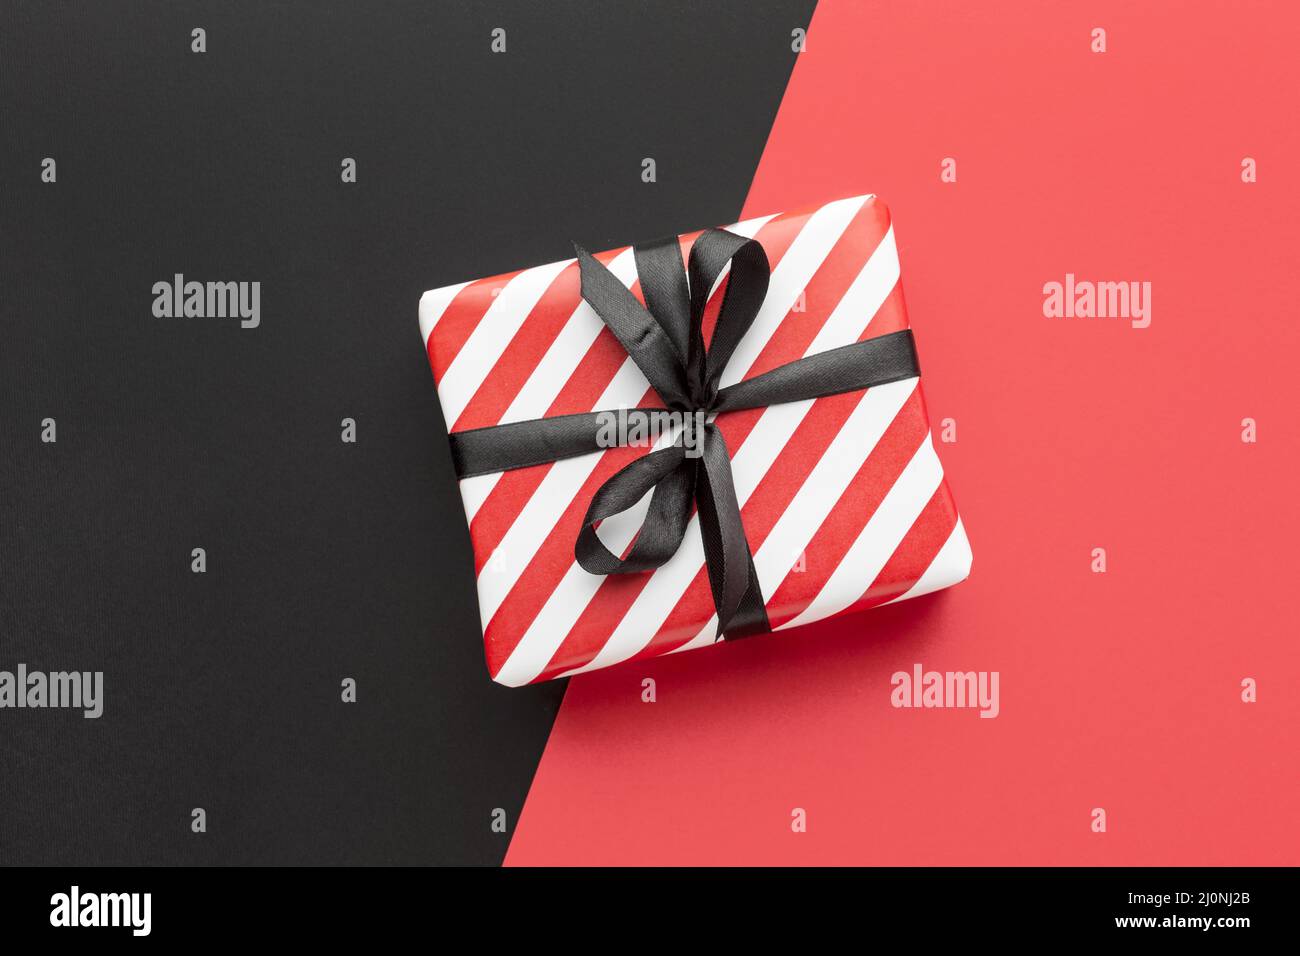 Top view gift box cyber monday concept. High quality and resolution beautiful photo concept Stock Photo